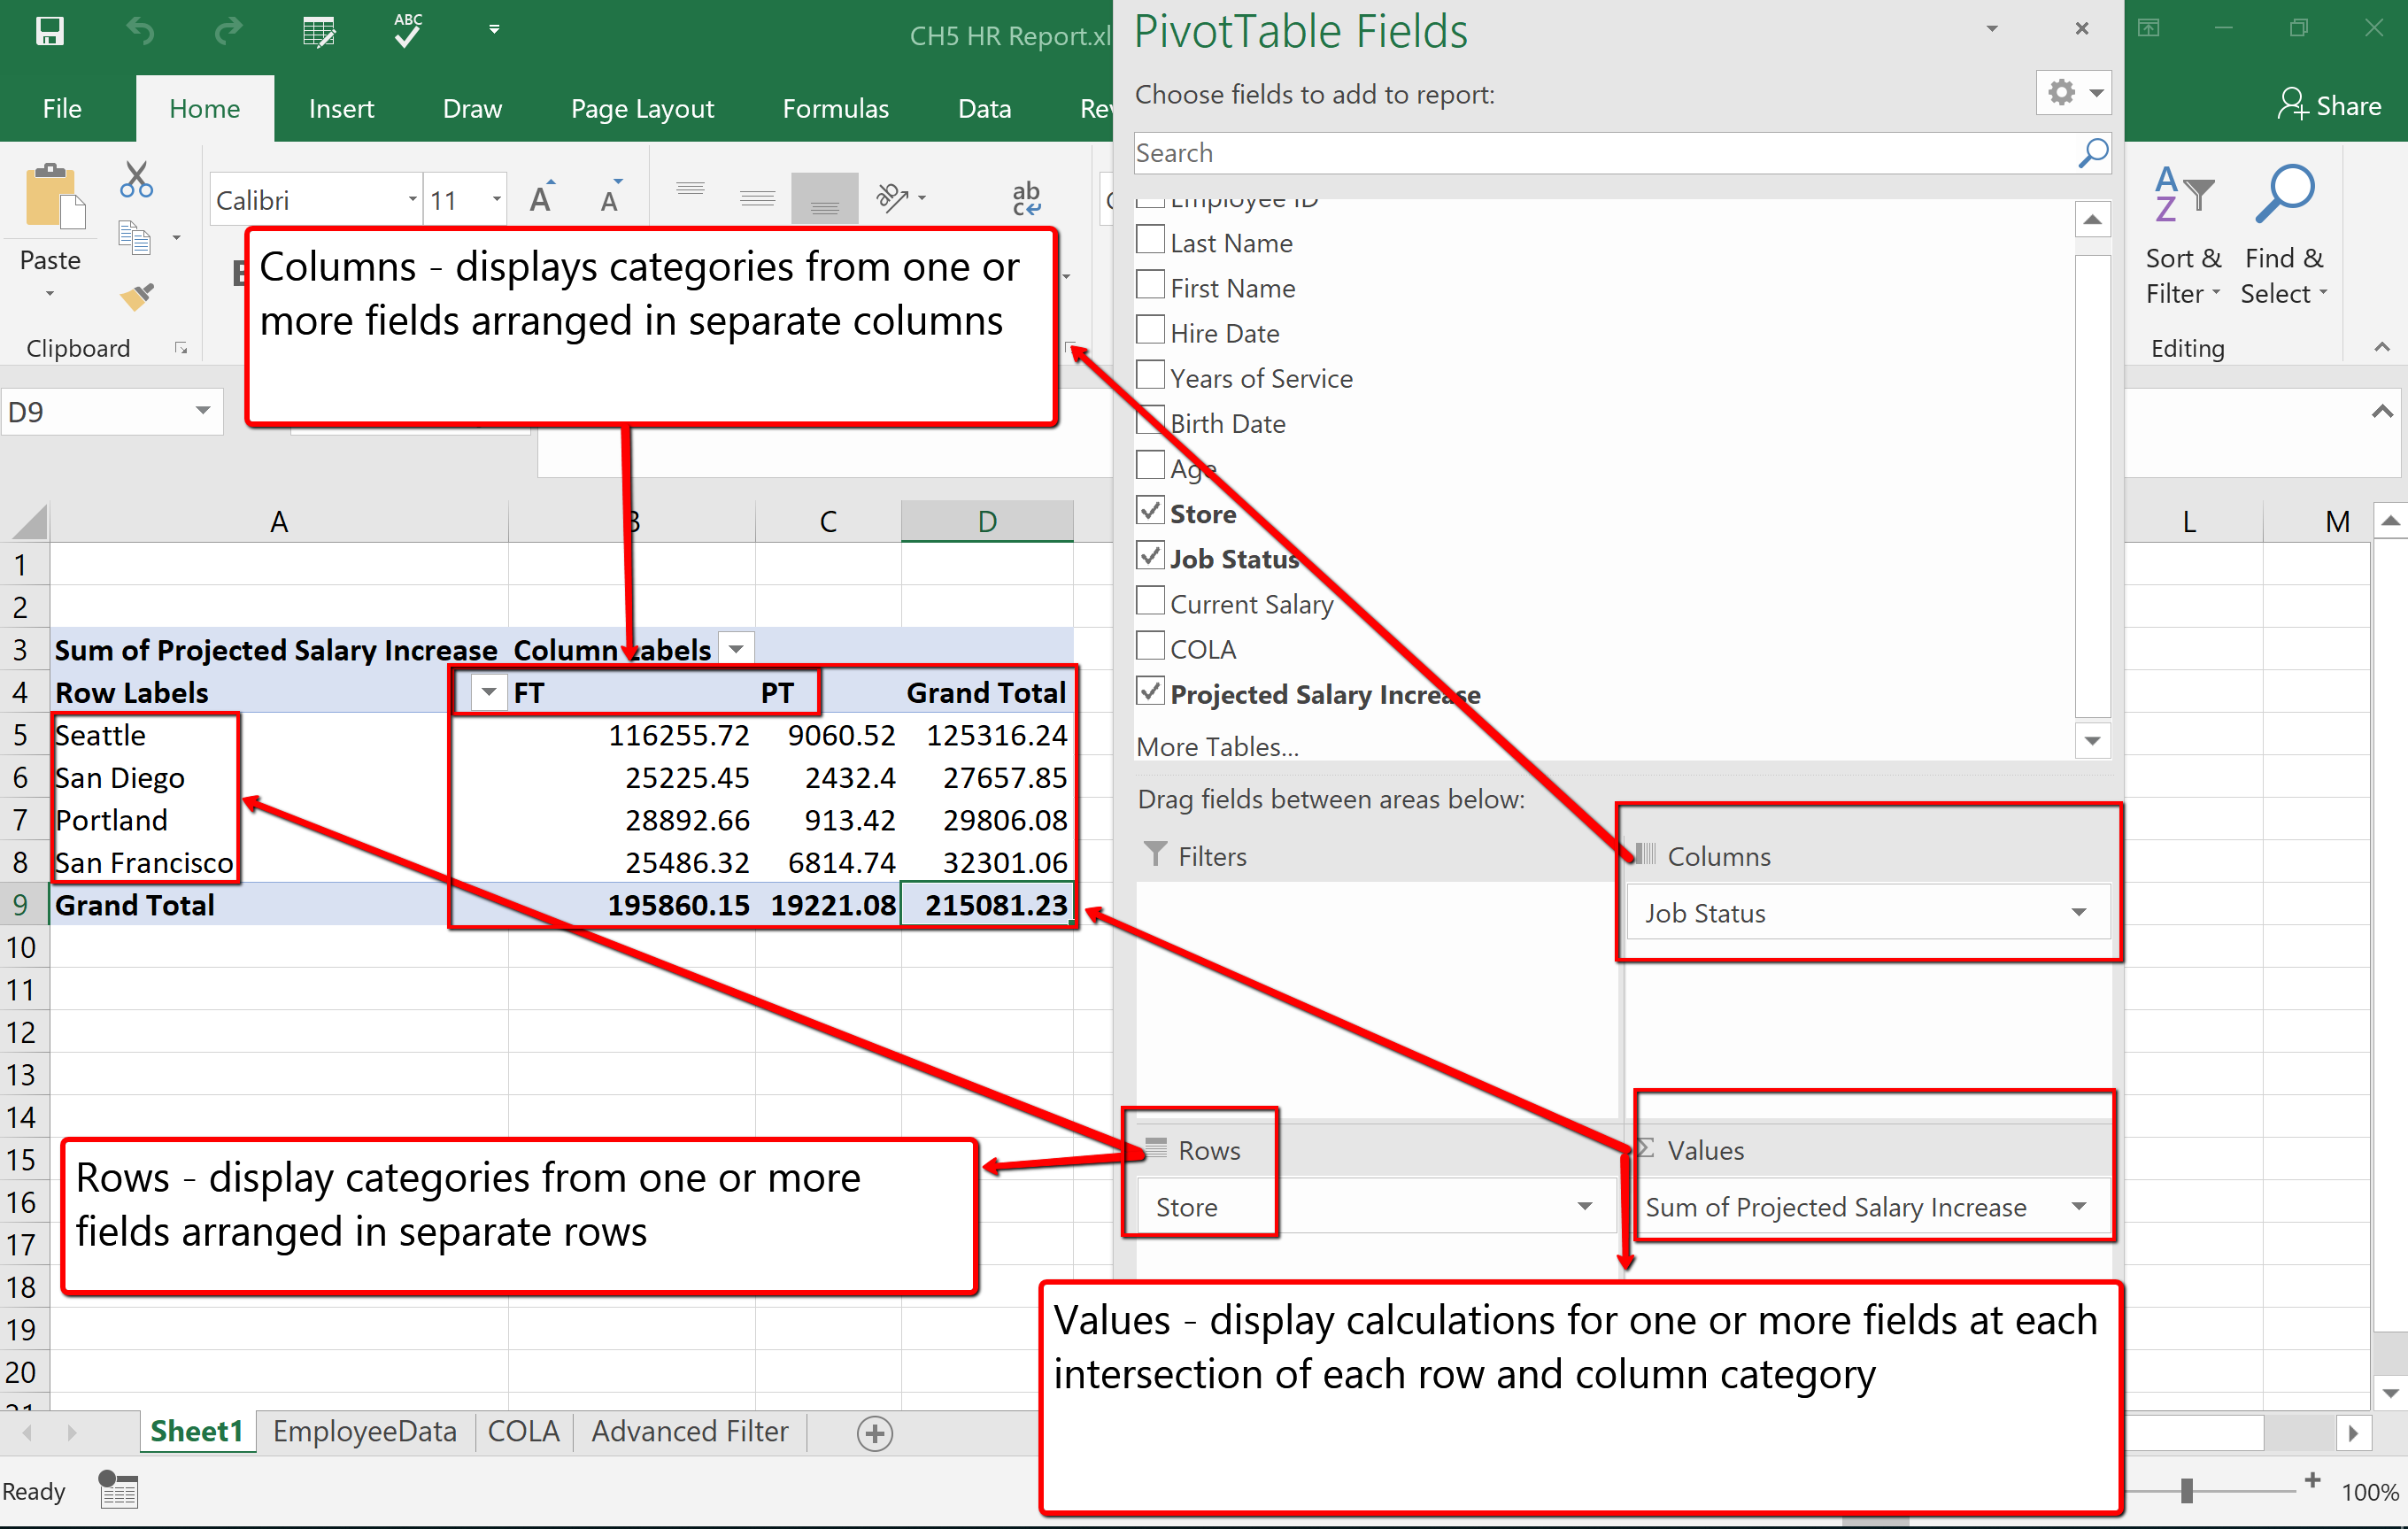 Screenshot showing parts of a pivot table window